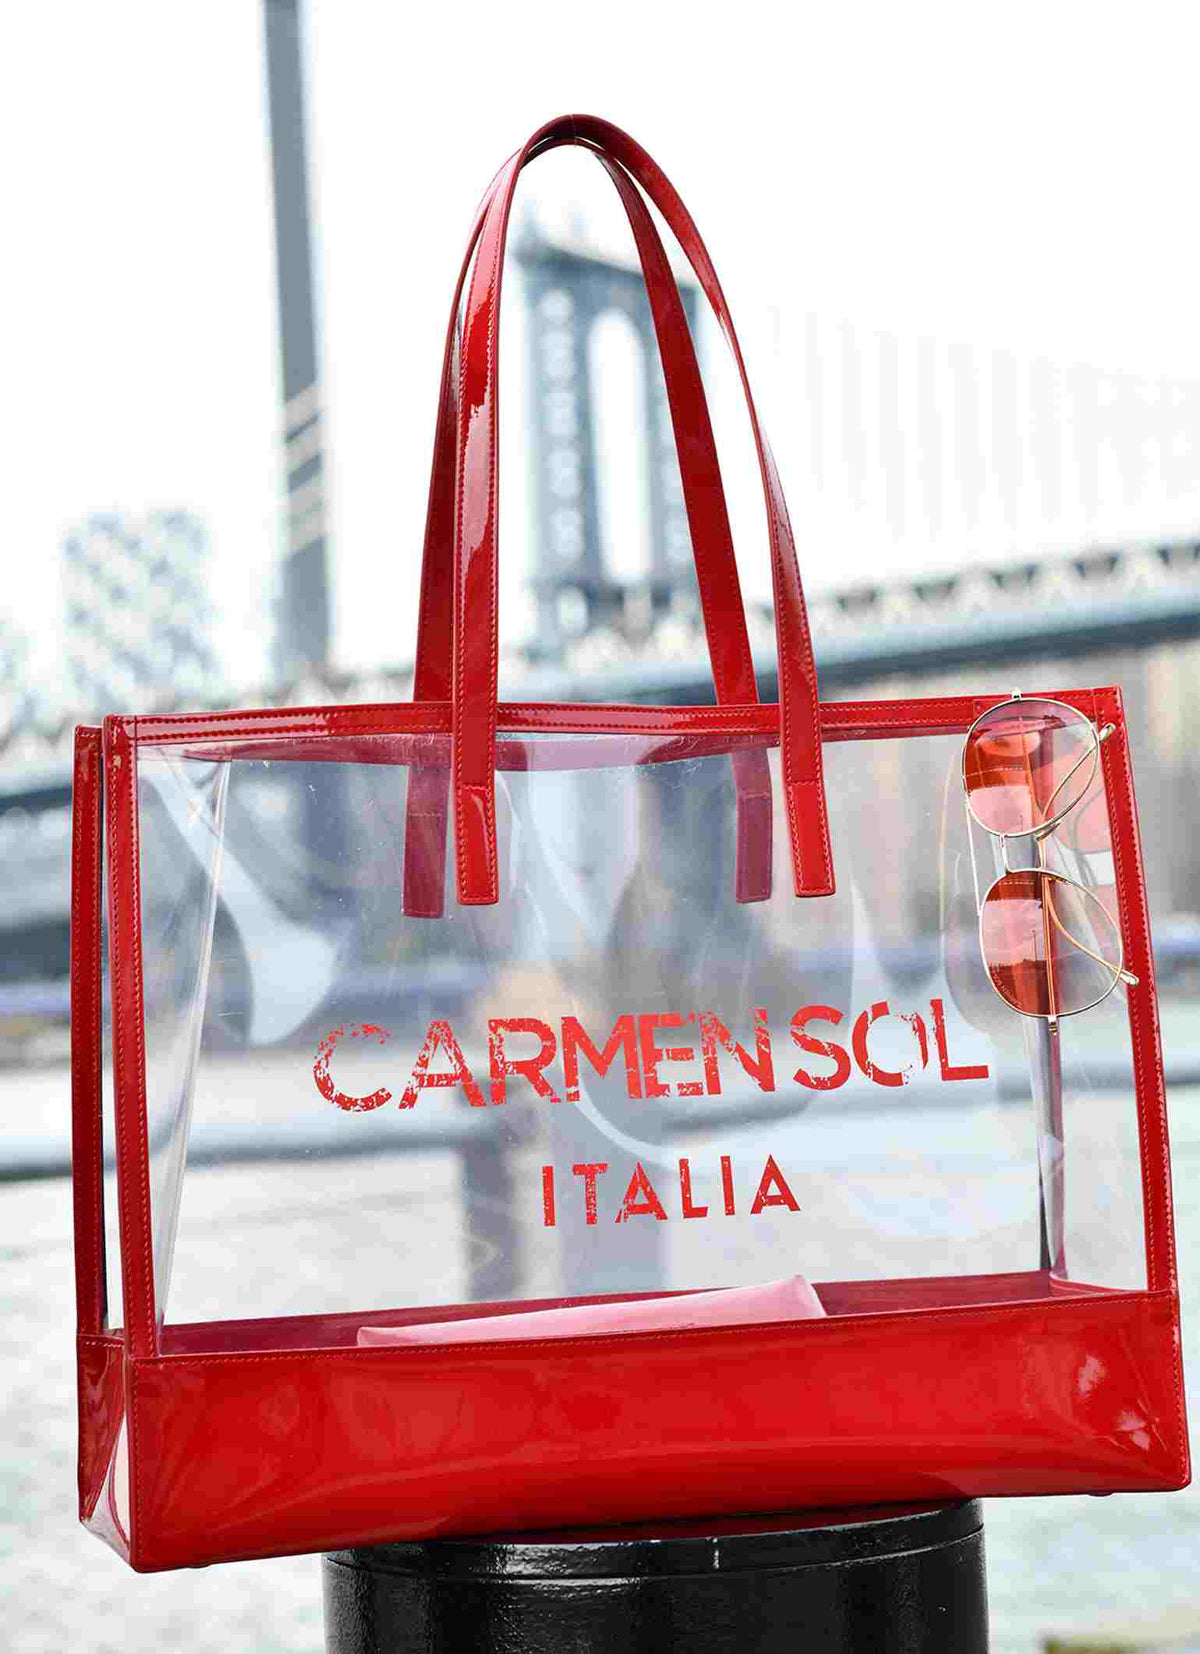 Taormina large tote bags for women in color red with sunglasses in red